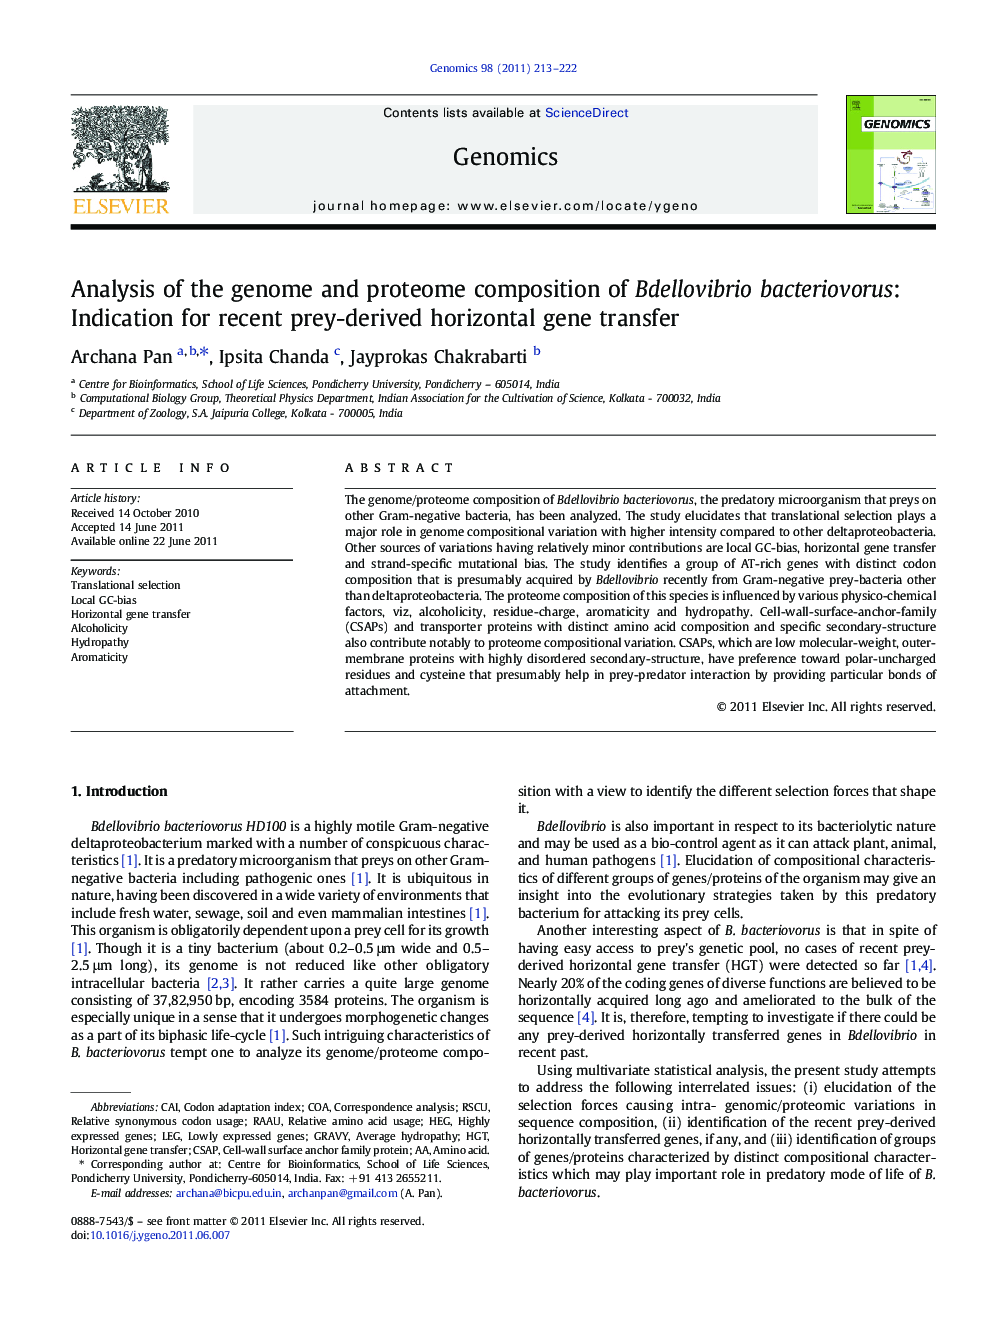 Analysis of the genome and proteome composition of Bdellovibrio bacteriovorus: Indication for recent prey-derived horizontal gene transfer